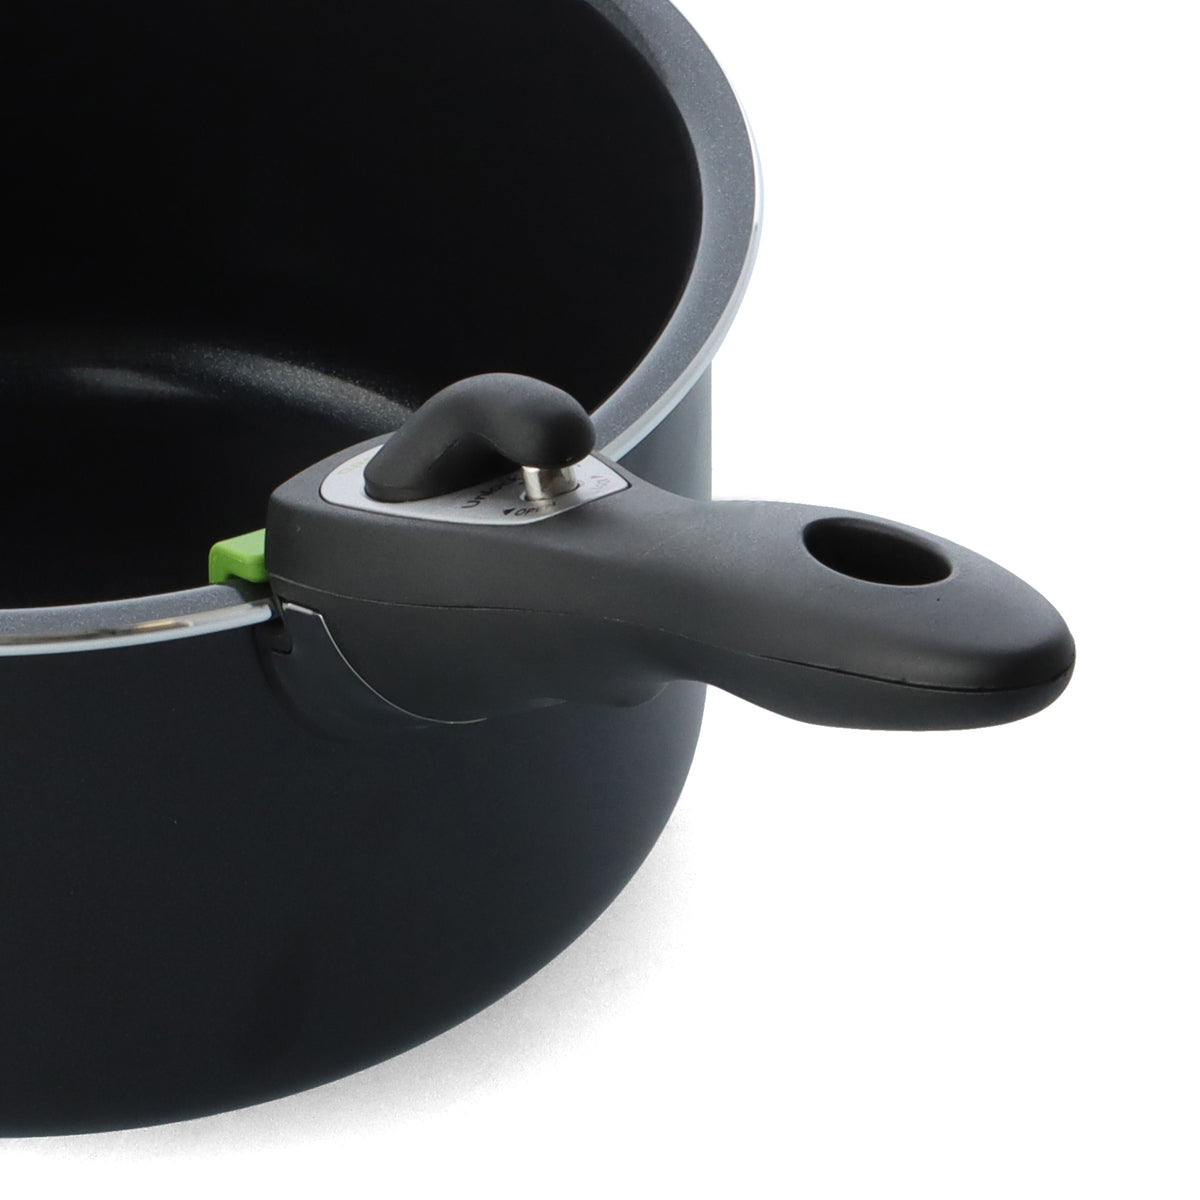 GreenPan Clip Series Ceramic Nonstick 3-Piece Saucepan Set with Removable Handle - 1.7 and 3.3 qts. Black